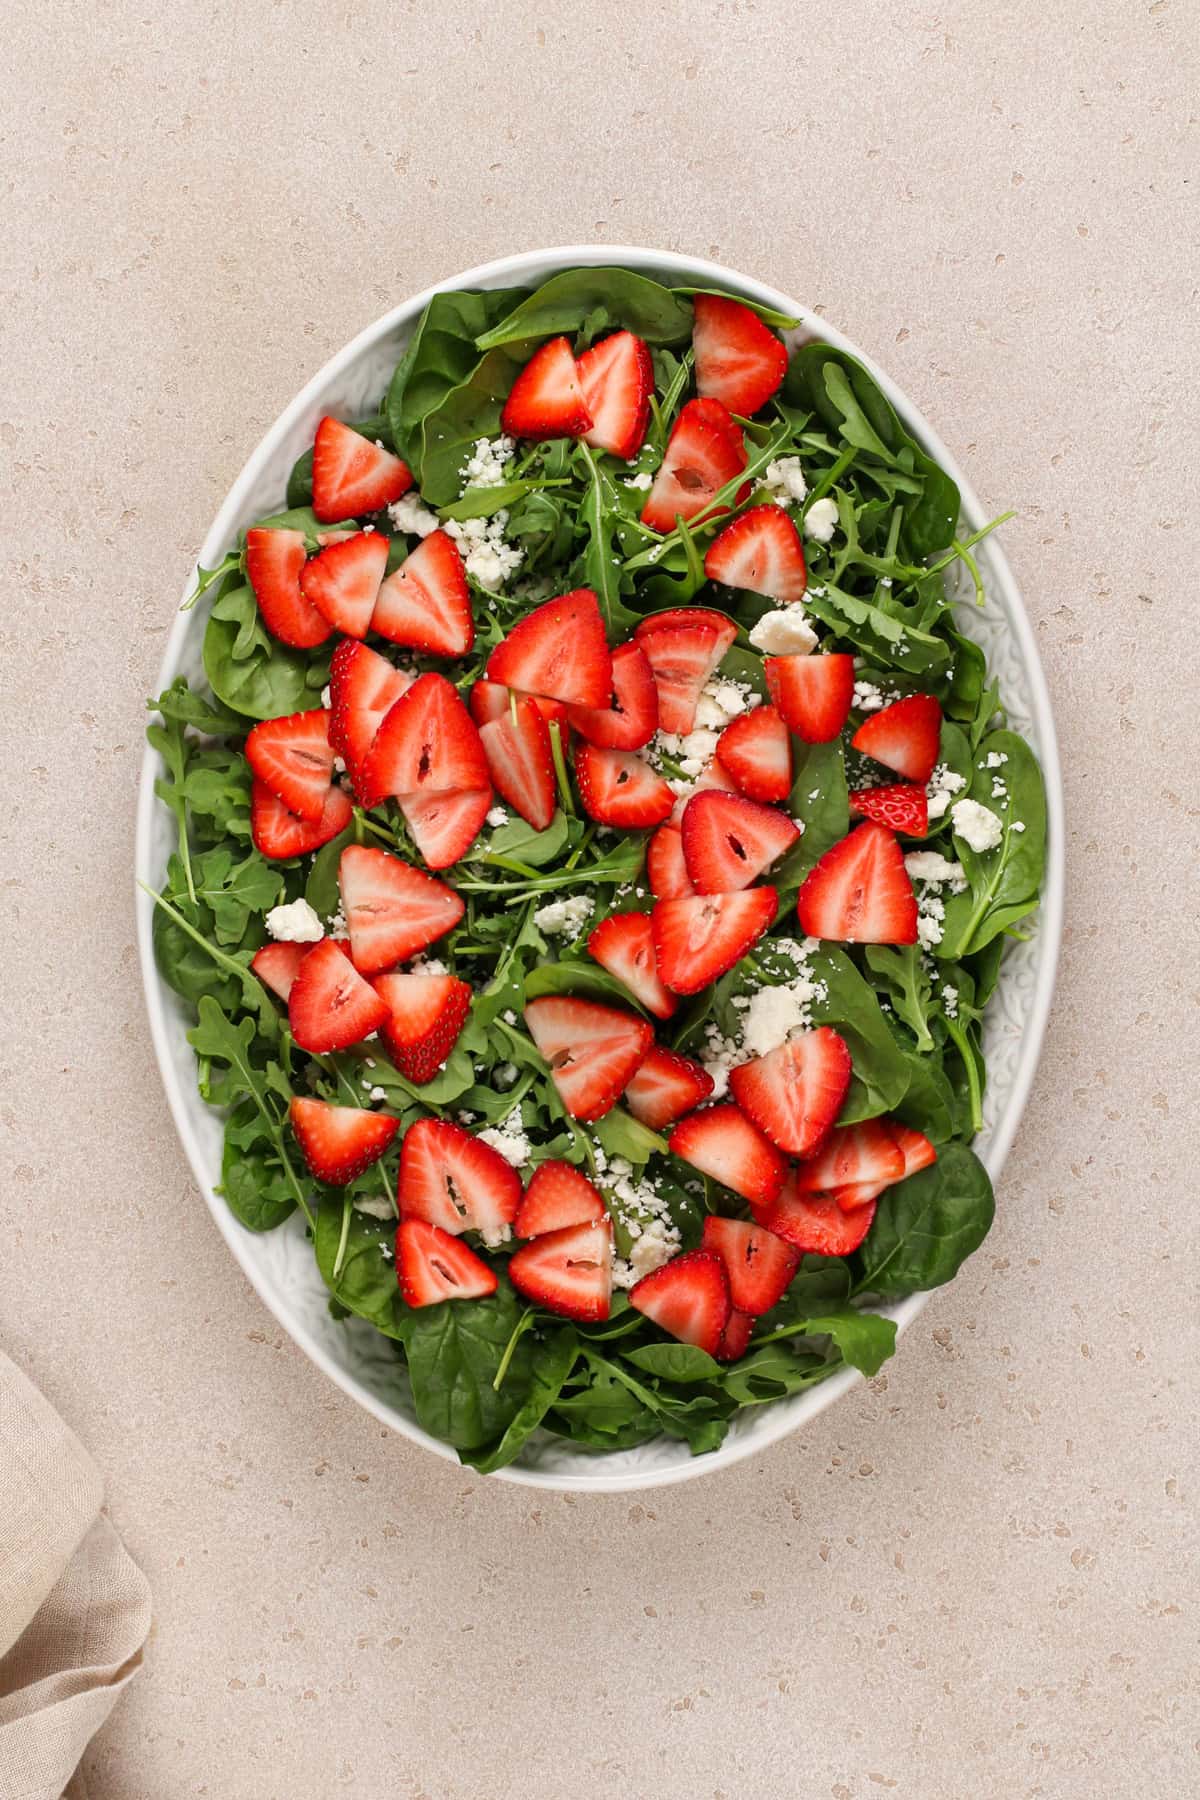 Greens topped with goat cheese and strawberries in a serving bowl.